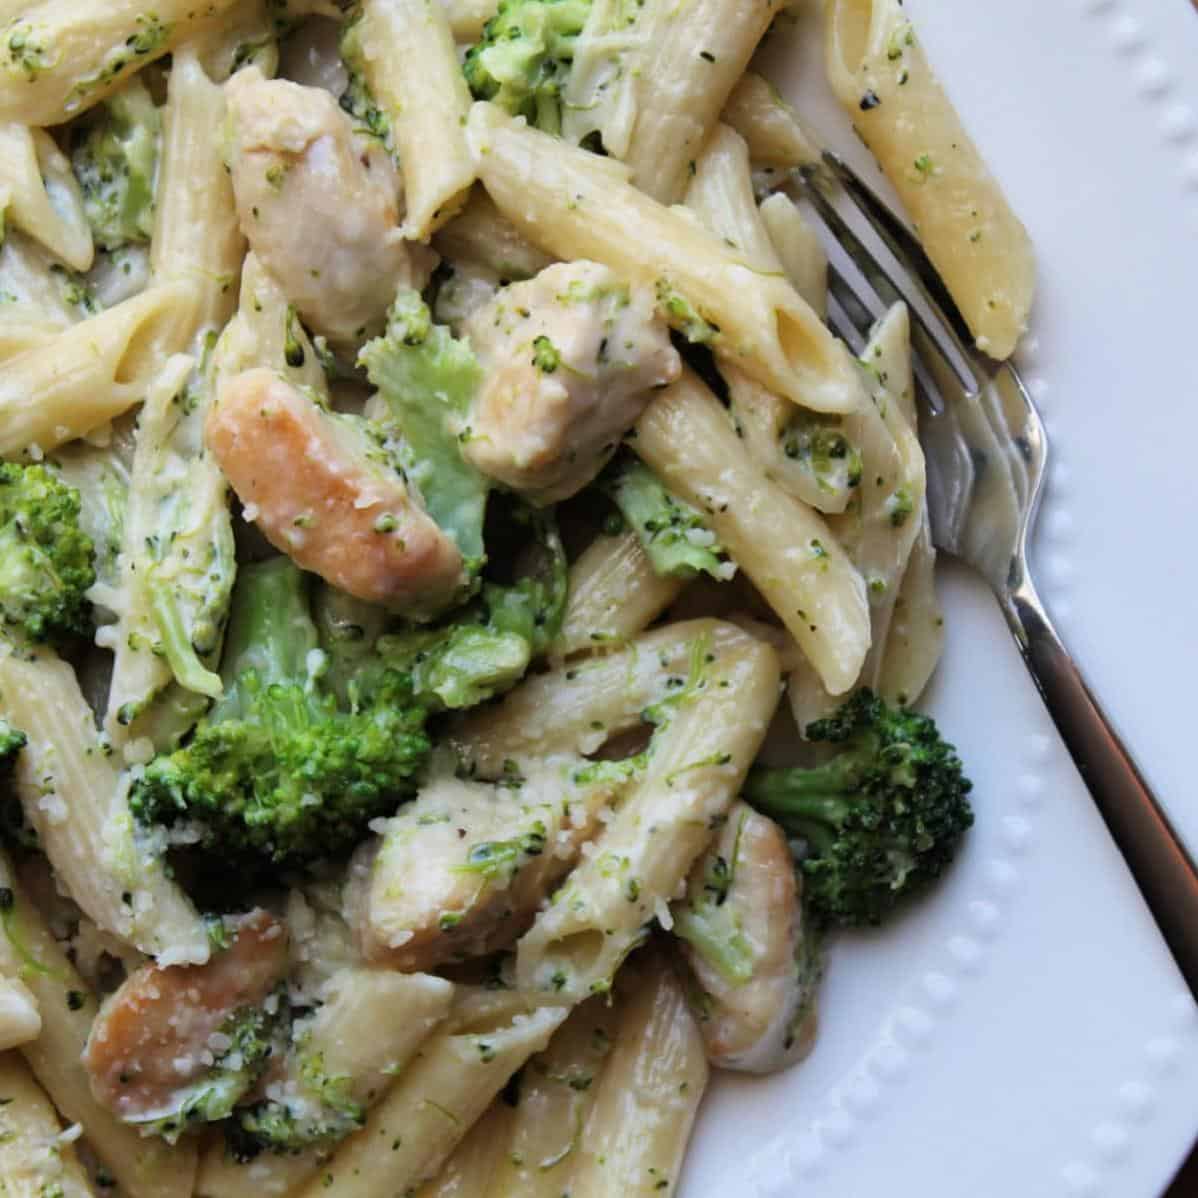  One forkful and you'll be in pasta heaven.